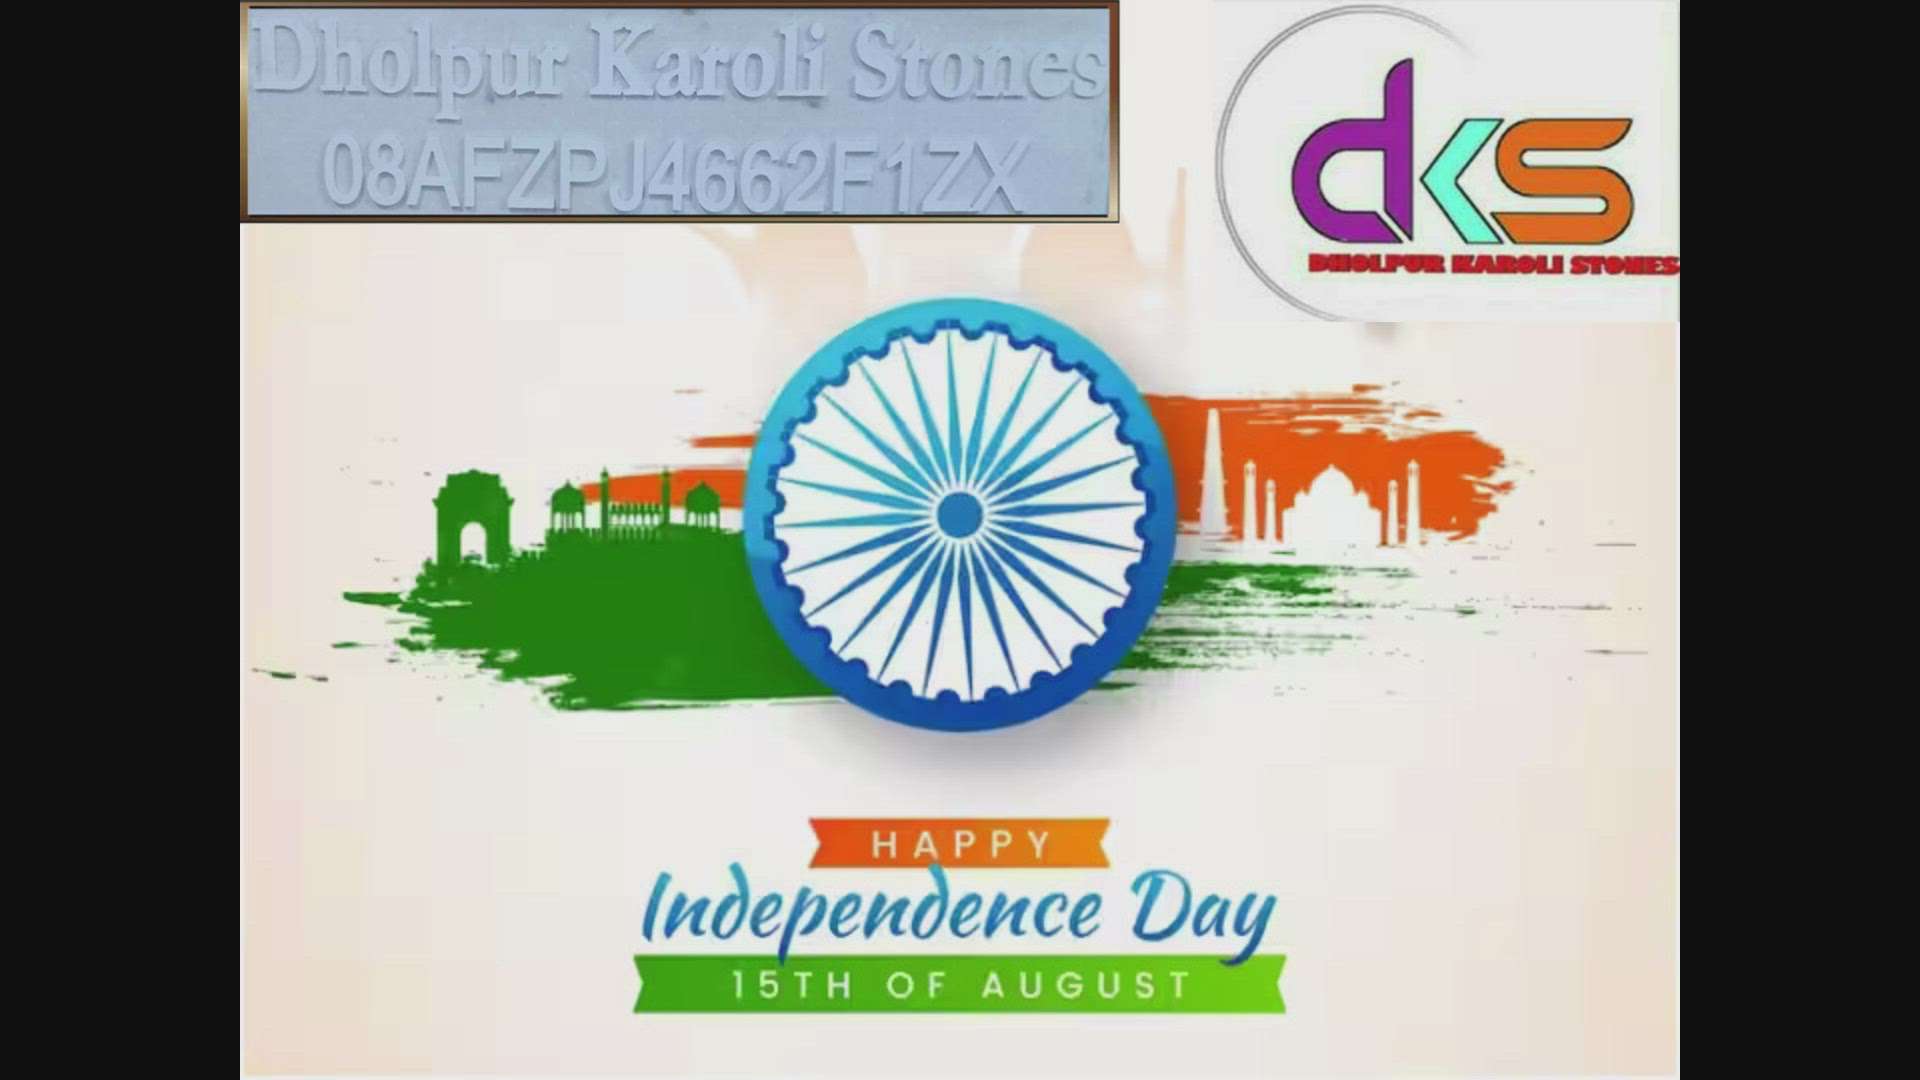 HAPPY 77th INDEPENDENCE DAY. 
 #Dholpur Karoli Stones .
Ajmer ROAD, 200ft Bypass, Jaipur 
Cont.no-9829200738(Mr.Prakash Chand Jindal).
 #All types of Sandstones available 
 #Tiles
 #chemicals [stone]
 #cobbels
 #cladding wall tiles
 #sandstone slab 
 #sandstone Nameplate 
#Sandstone Jaali  
 #ELEVATION 
 #INTERIOR
 #EXTERIOR